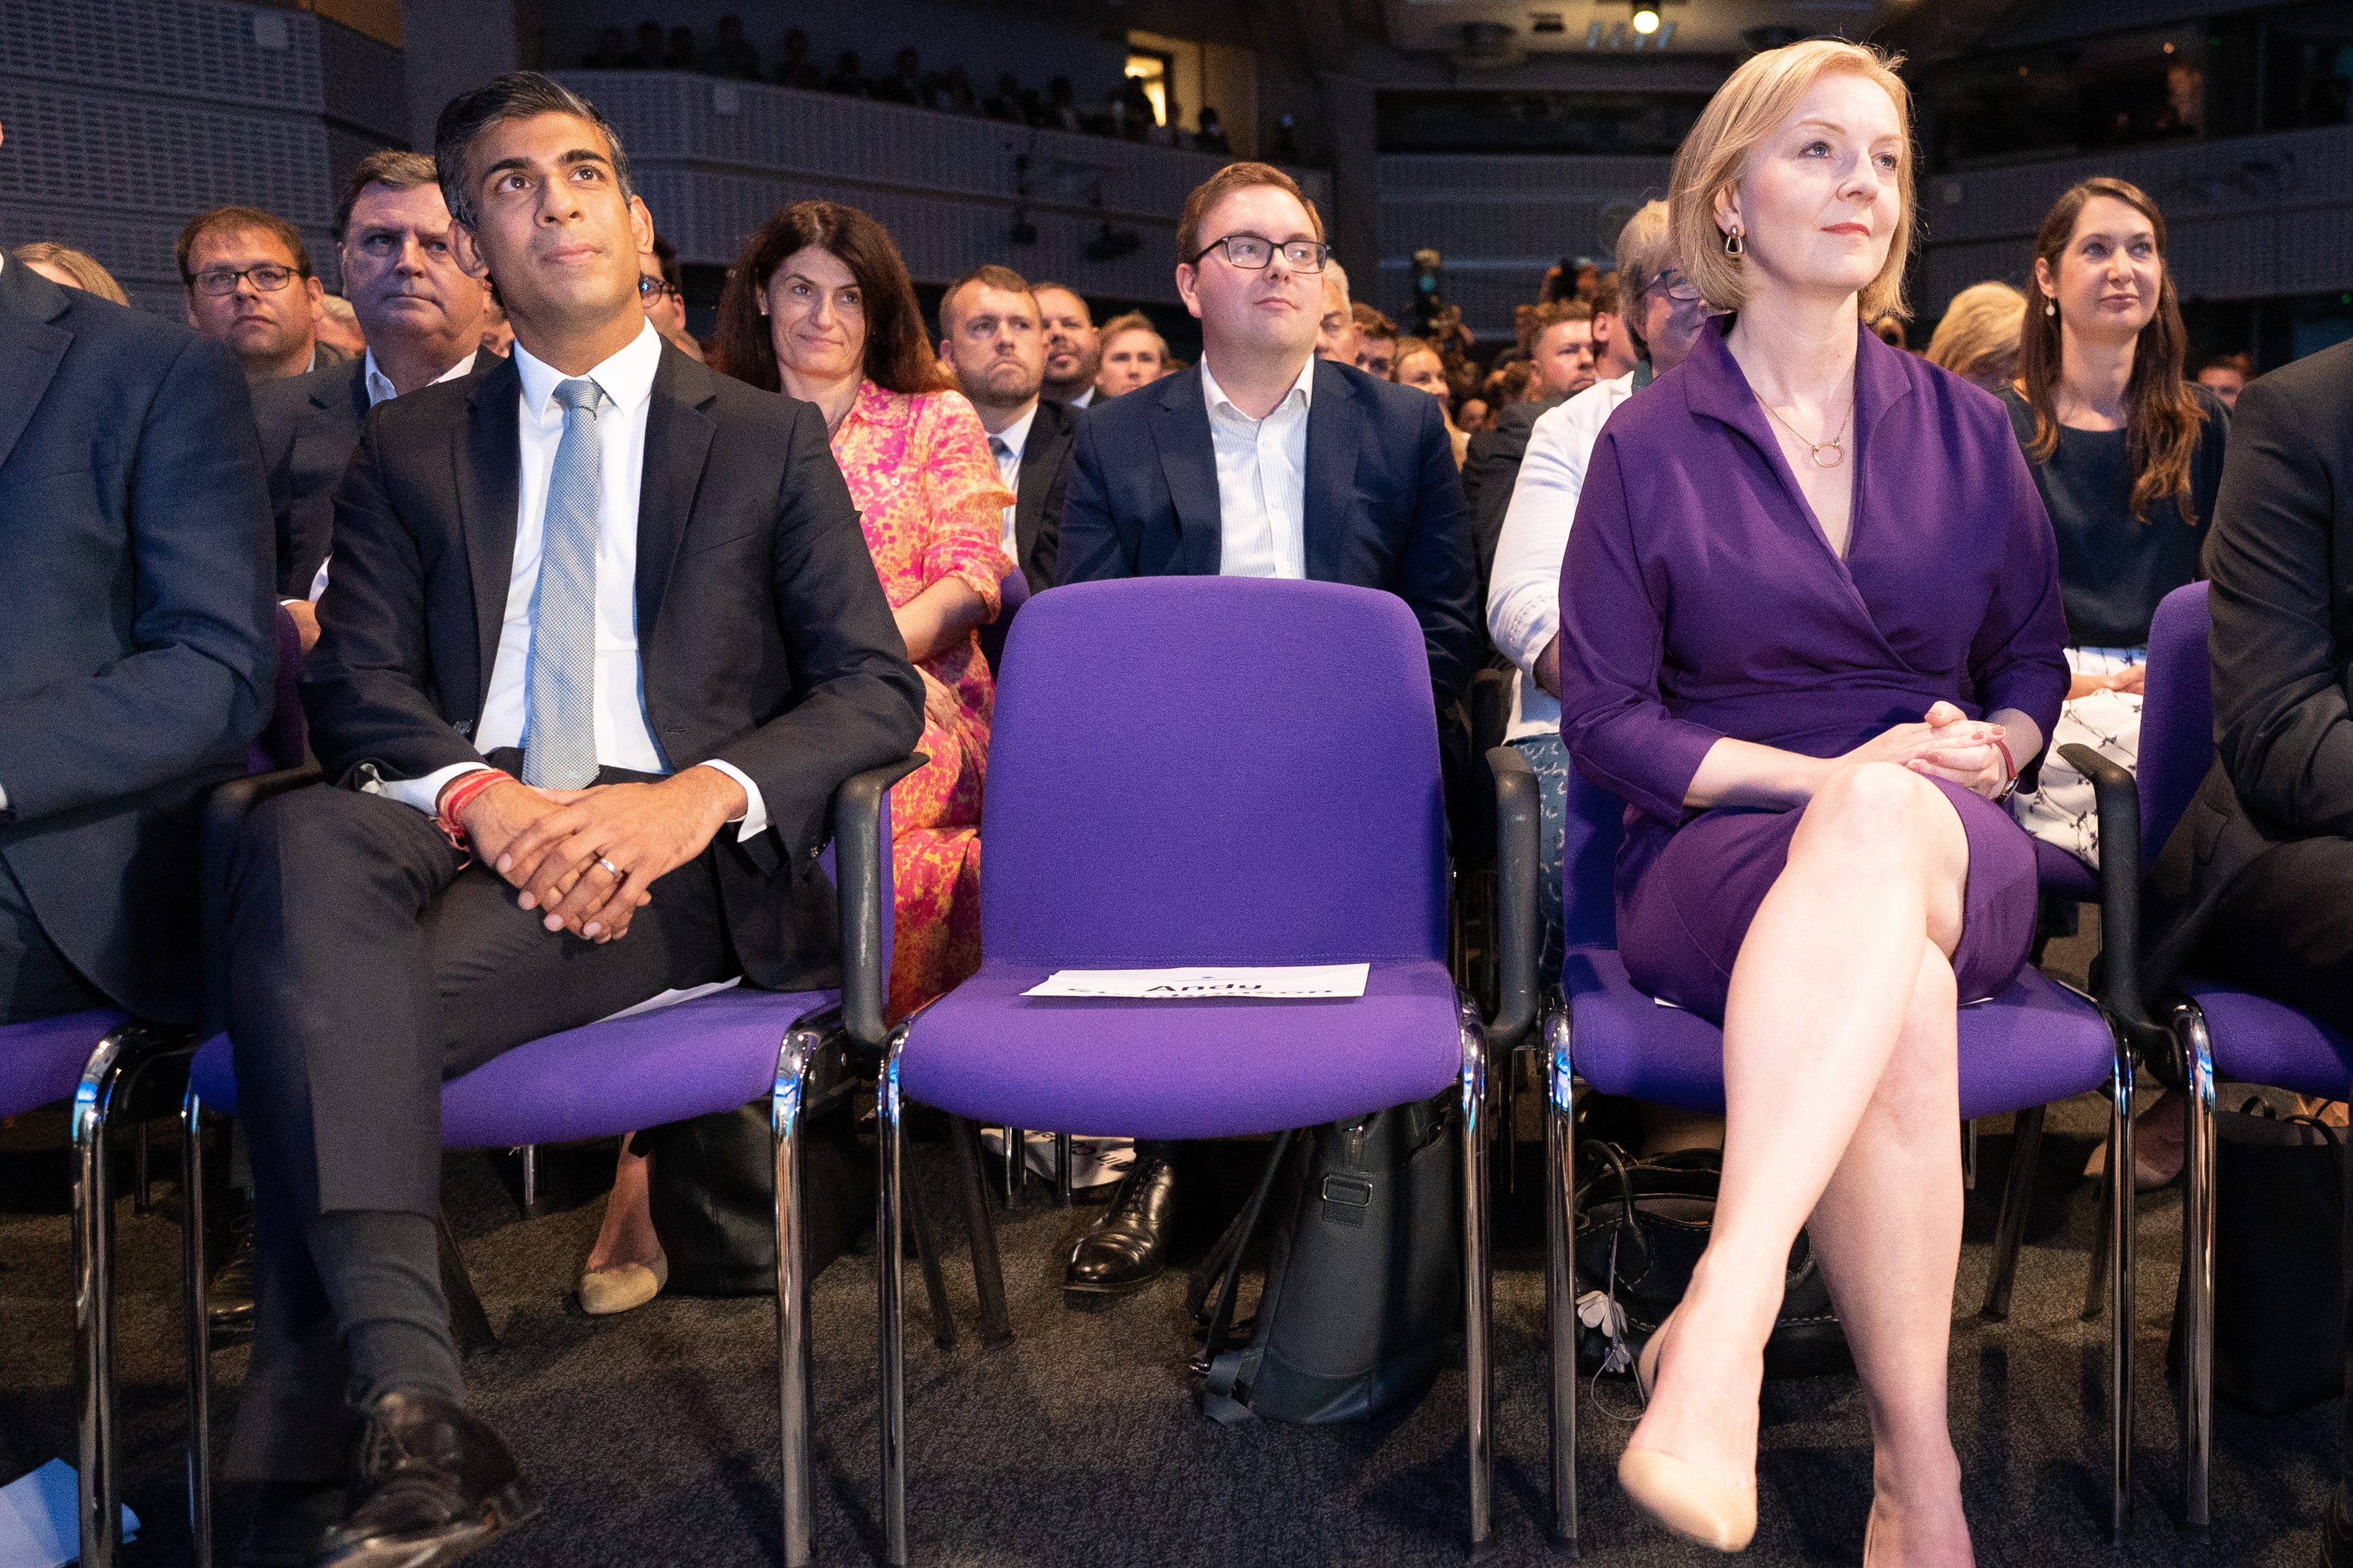 Rishi Sunak and Liz Truss at the Queen Elizabeth II Centre in London on Monday as Ms Truss was announced as the new Conservative Party leader